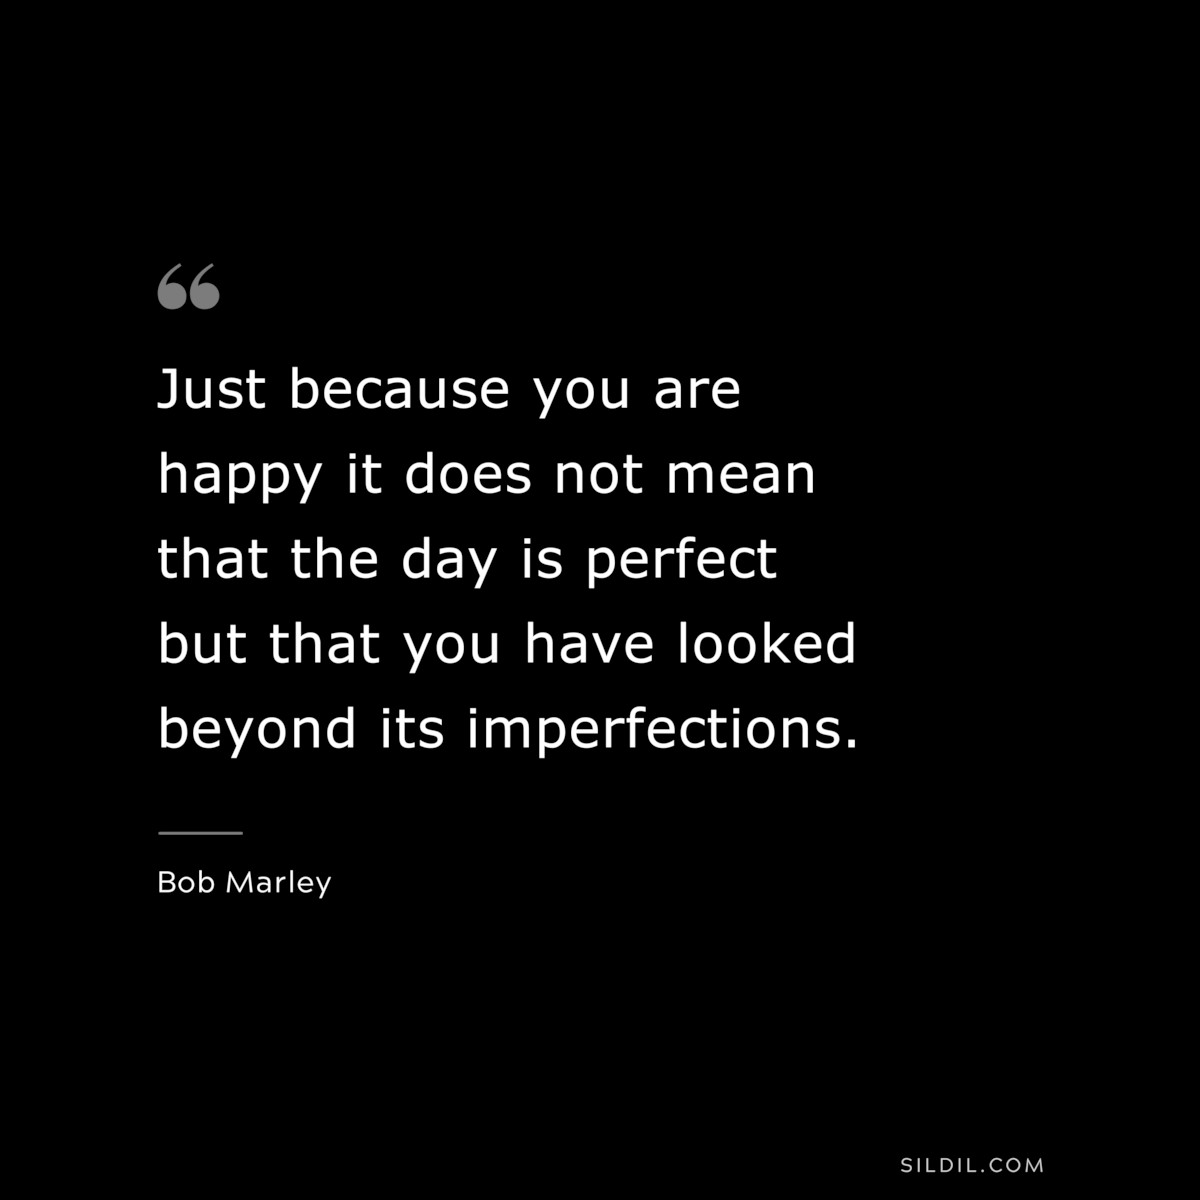 Just because you are happy it does not mean that the day is perfect but that you have looked beyond its imperfections. ― Bob Marley